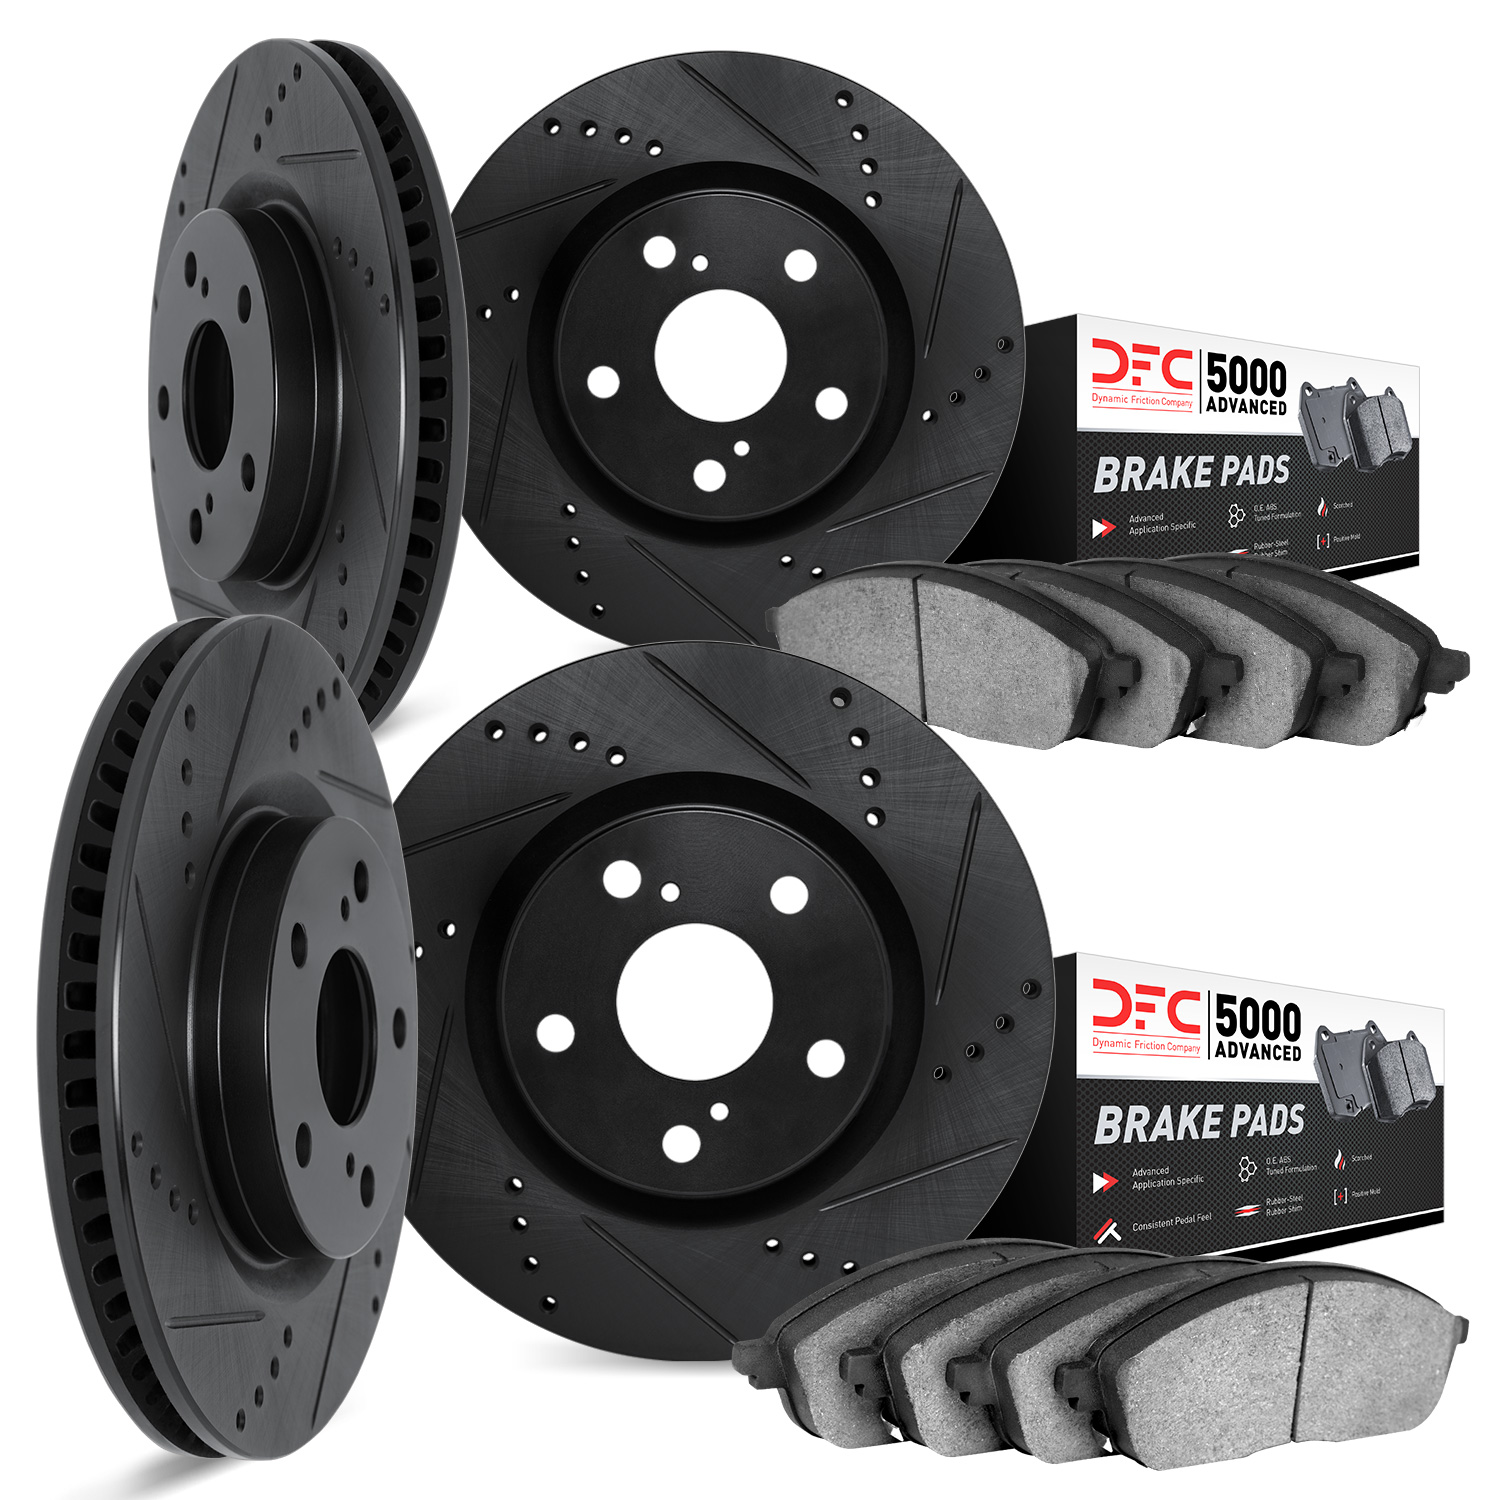 8504-27010 Drilled/Slotted Brake Rotors w/5000 Advanced Brake Pads Kit [Black], 2007-2015 Volvo, Position: Front and Rear